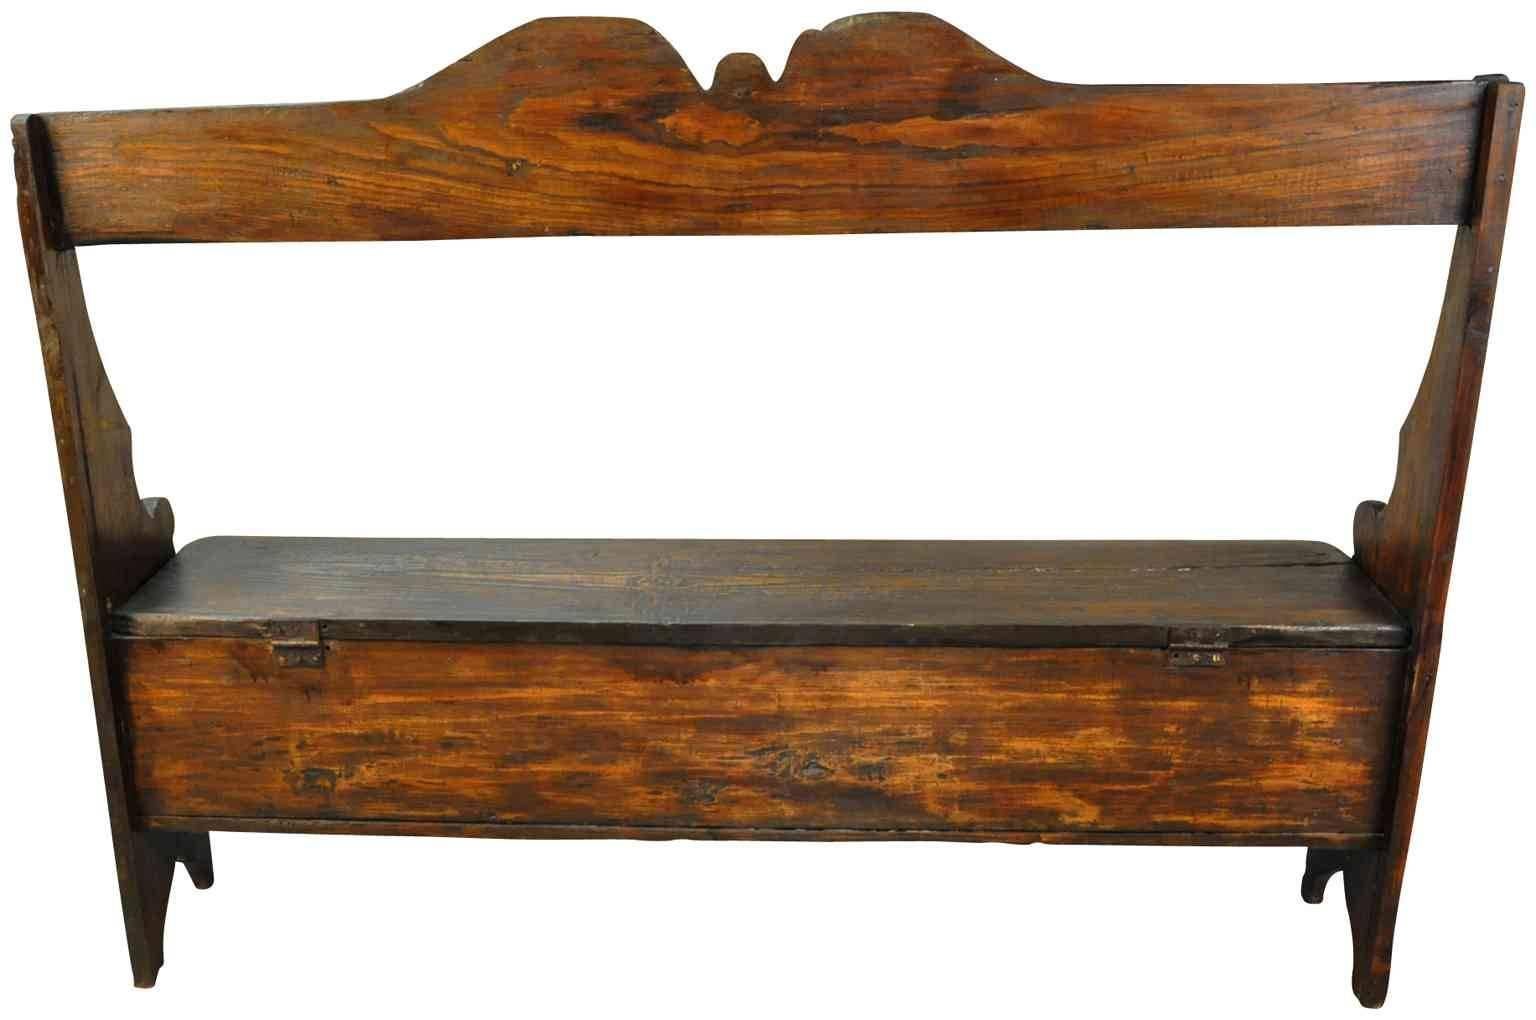 Chestnut Early 19th Century Settle Bench from Portugal